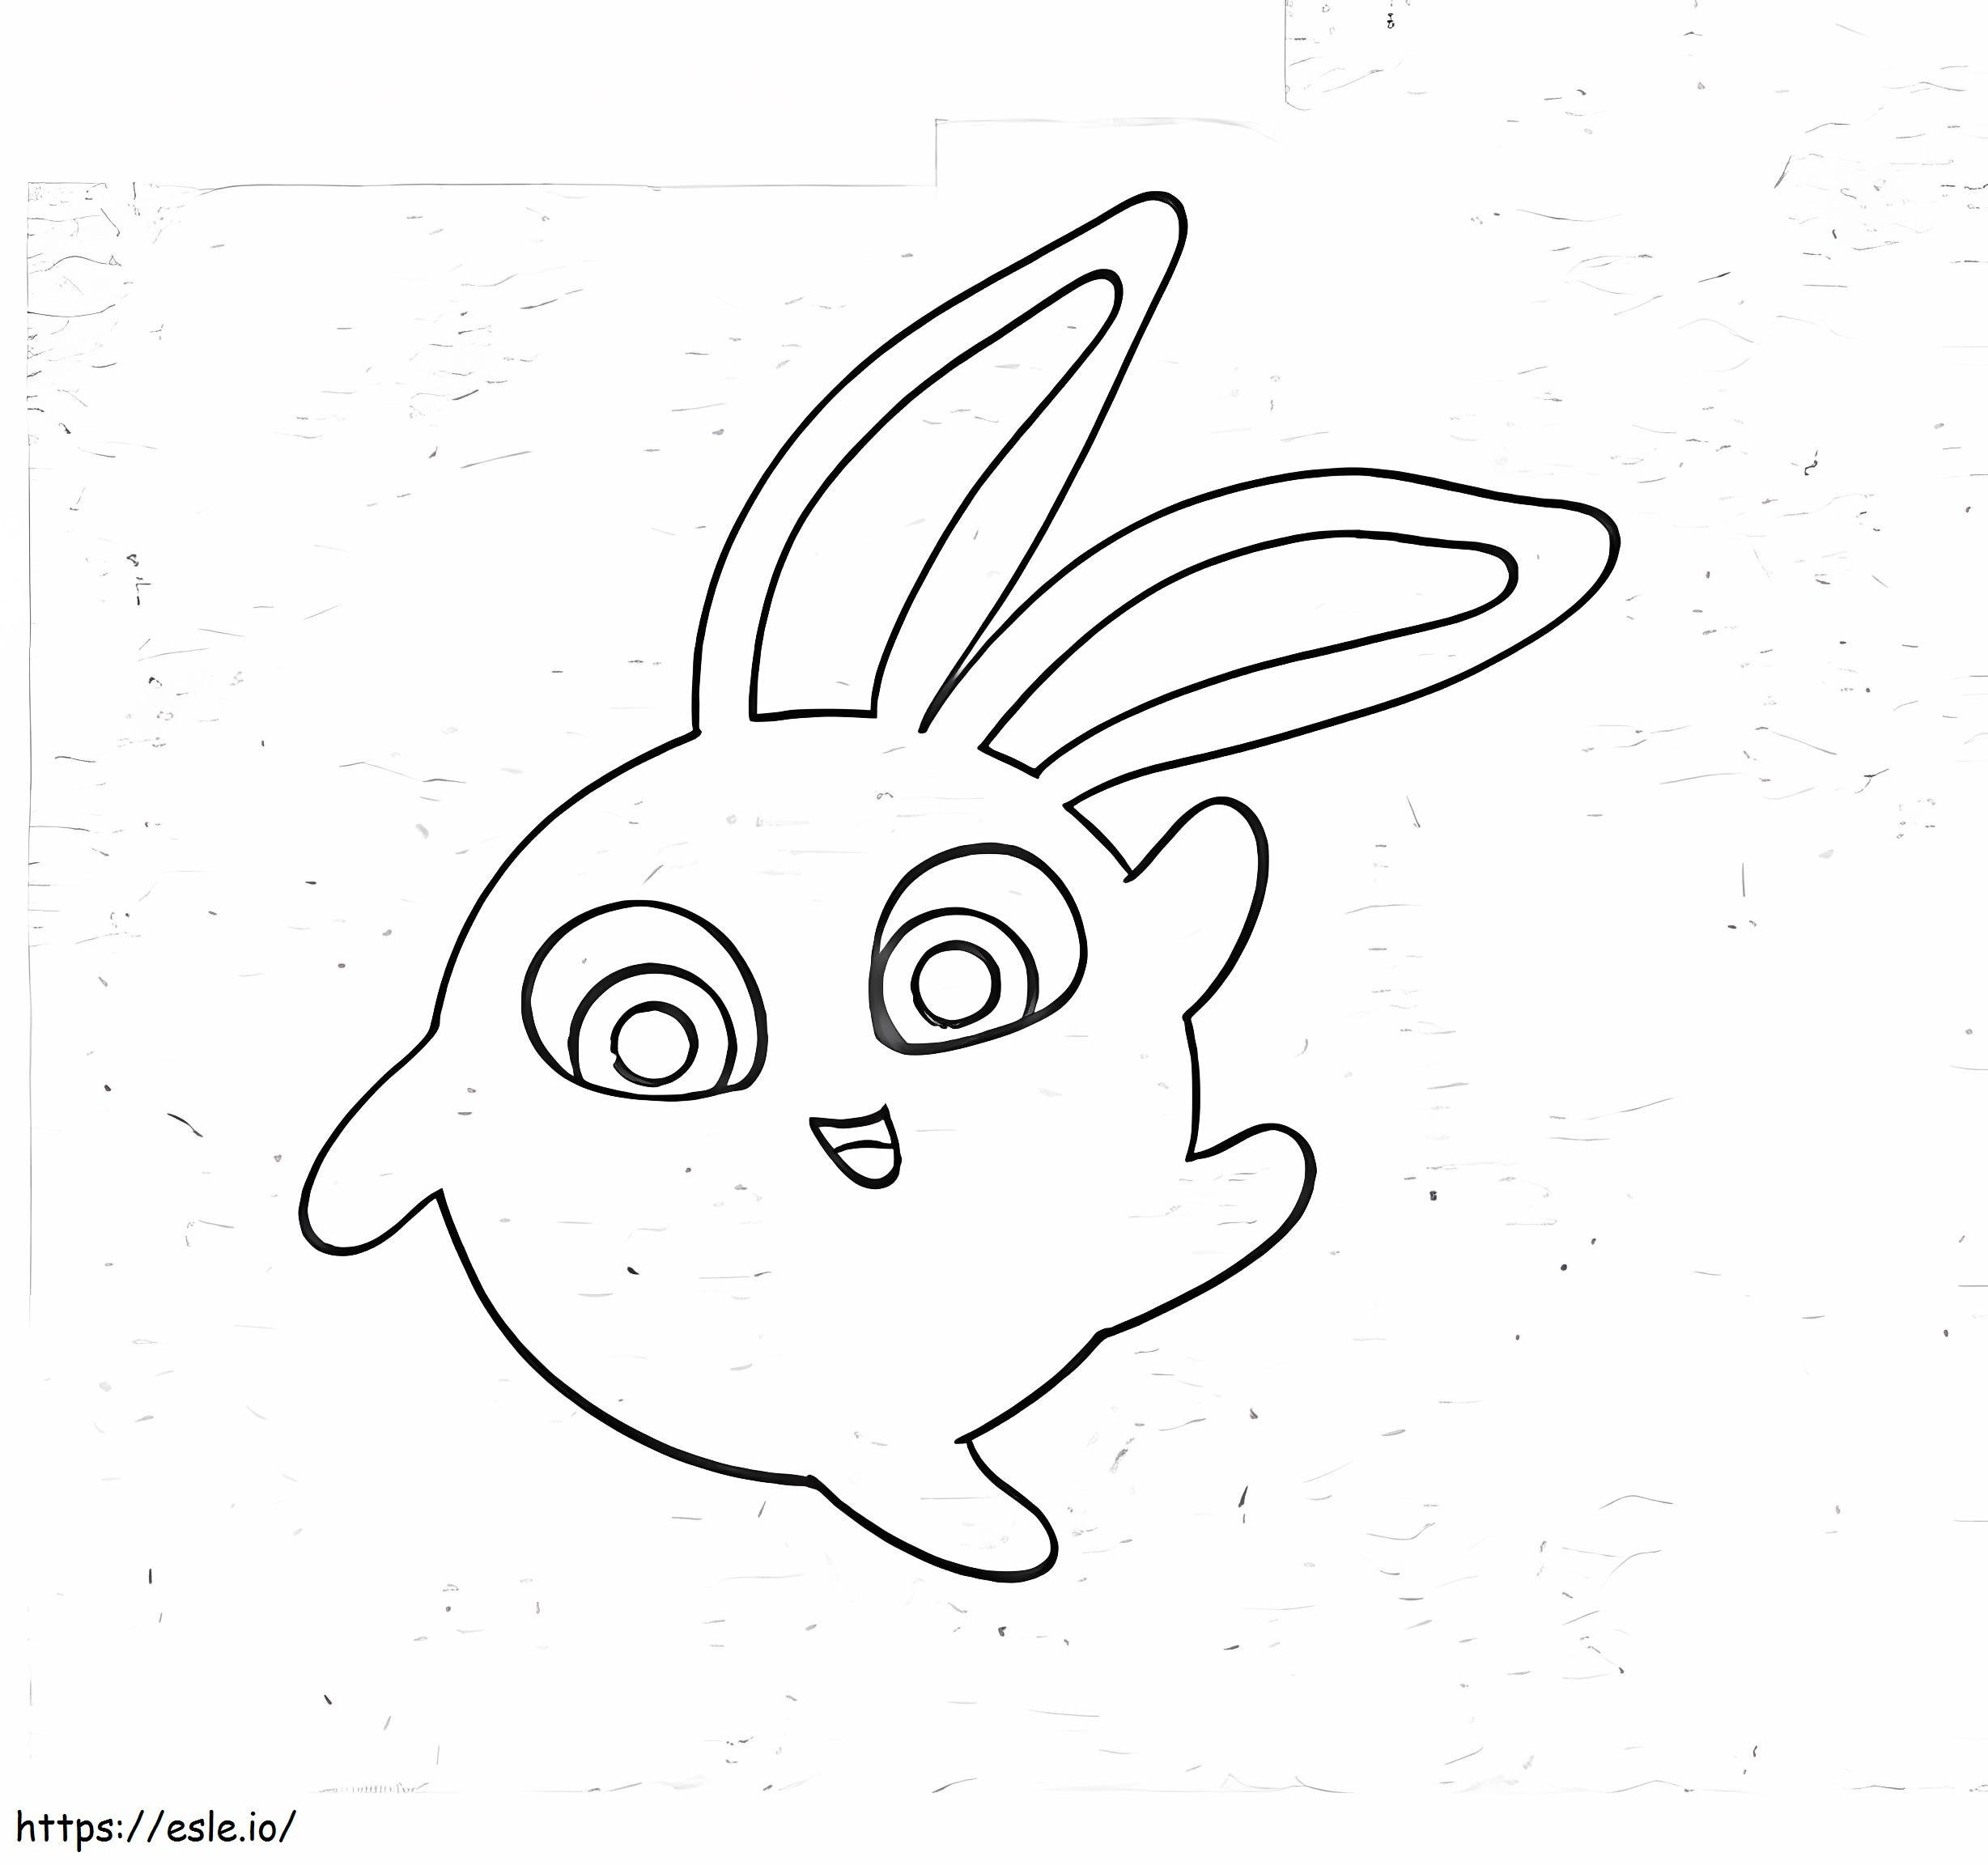 Sunny Hopper Bunnies coloring page